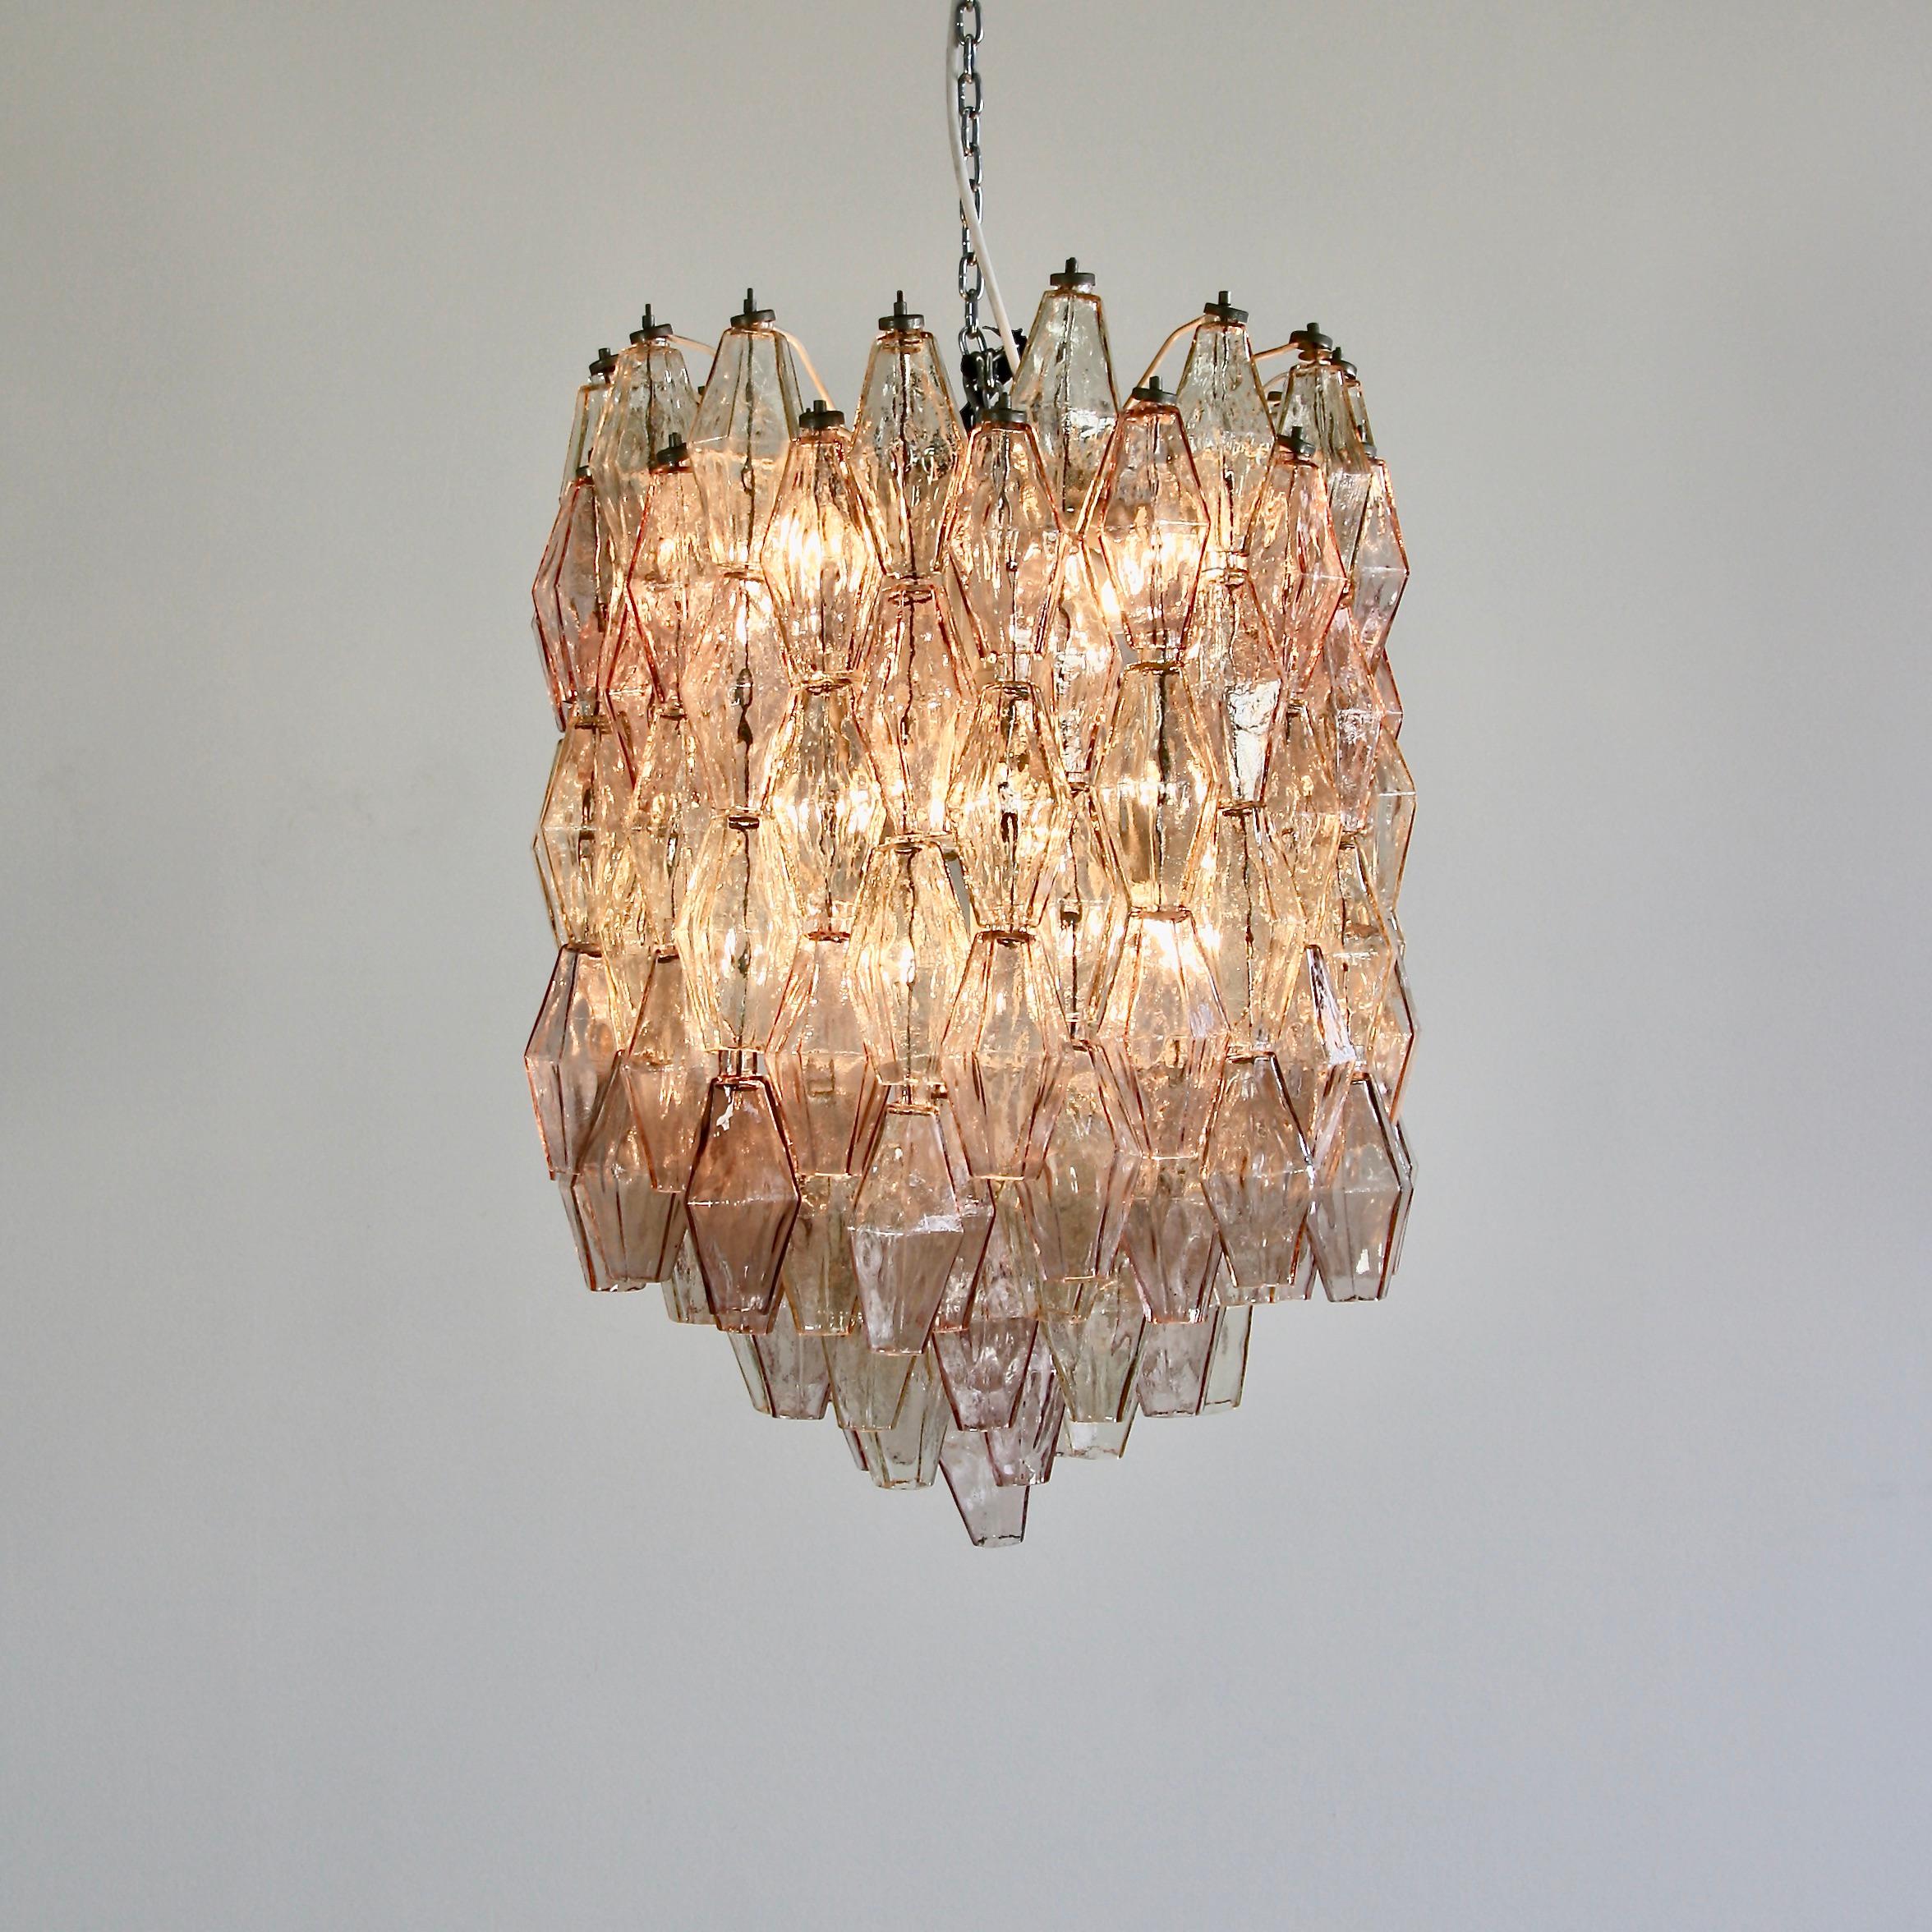 Mid-20th Century Polyhedron Chandelier by Carlo Scarpa, Murano Glass, 1960s